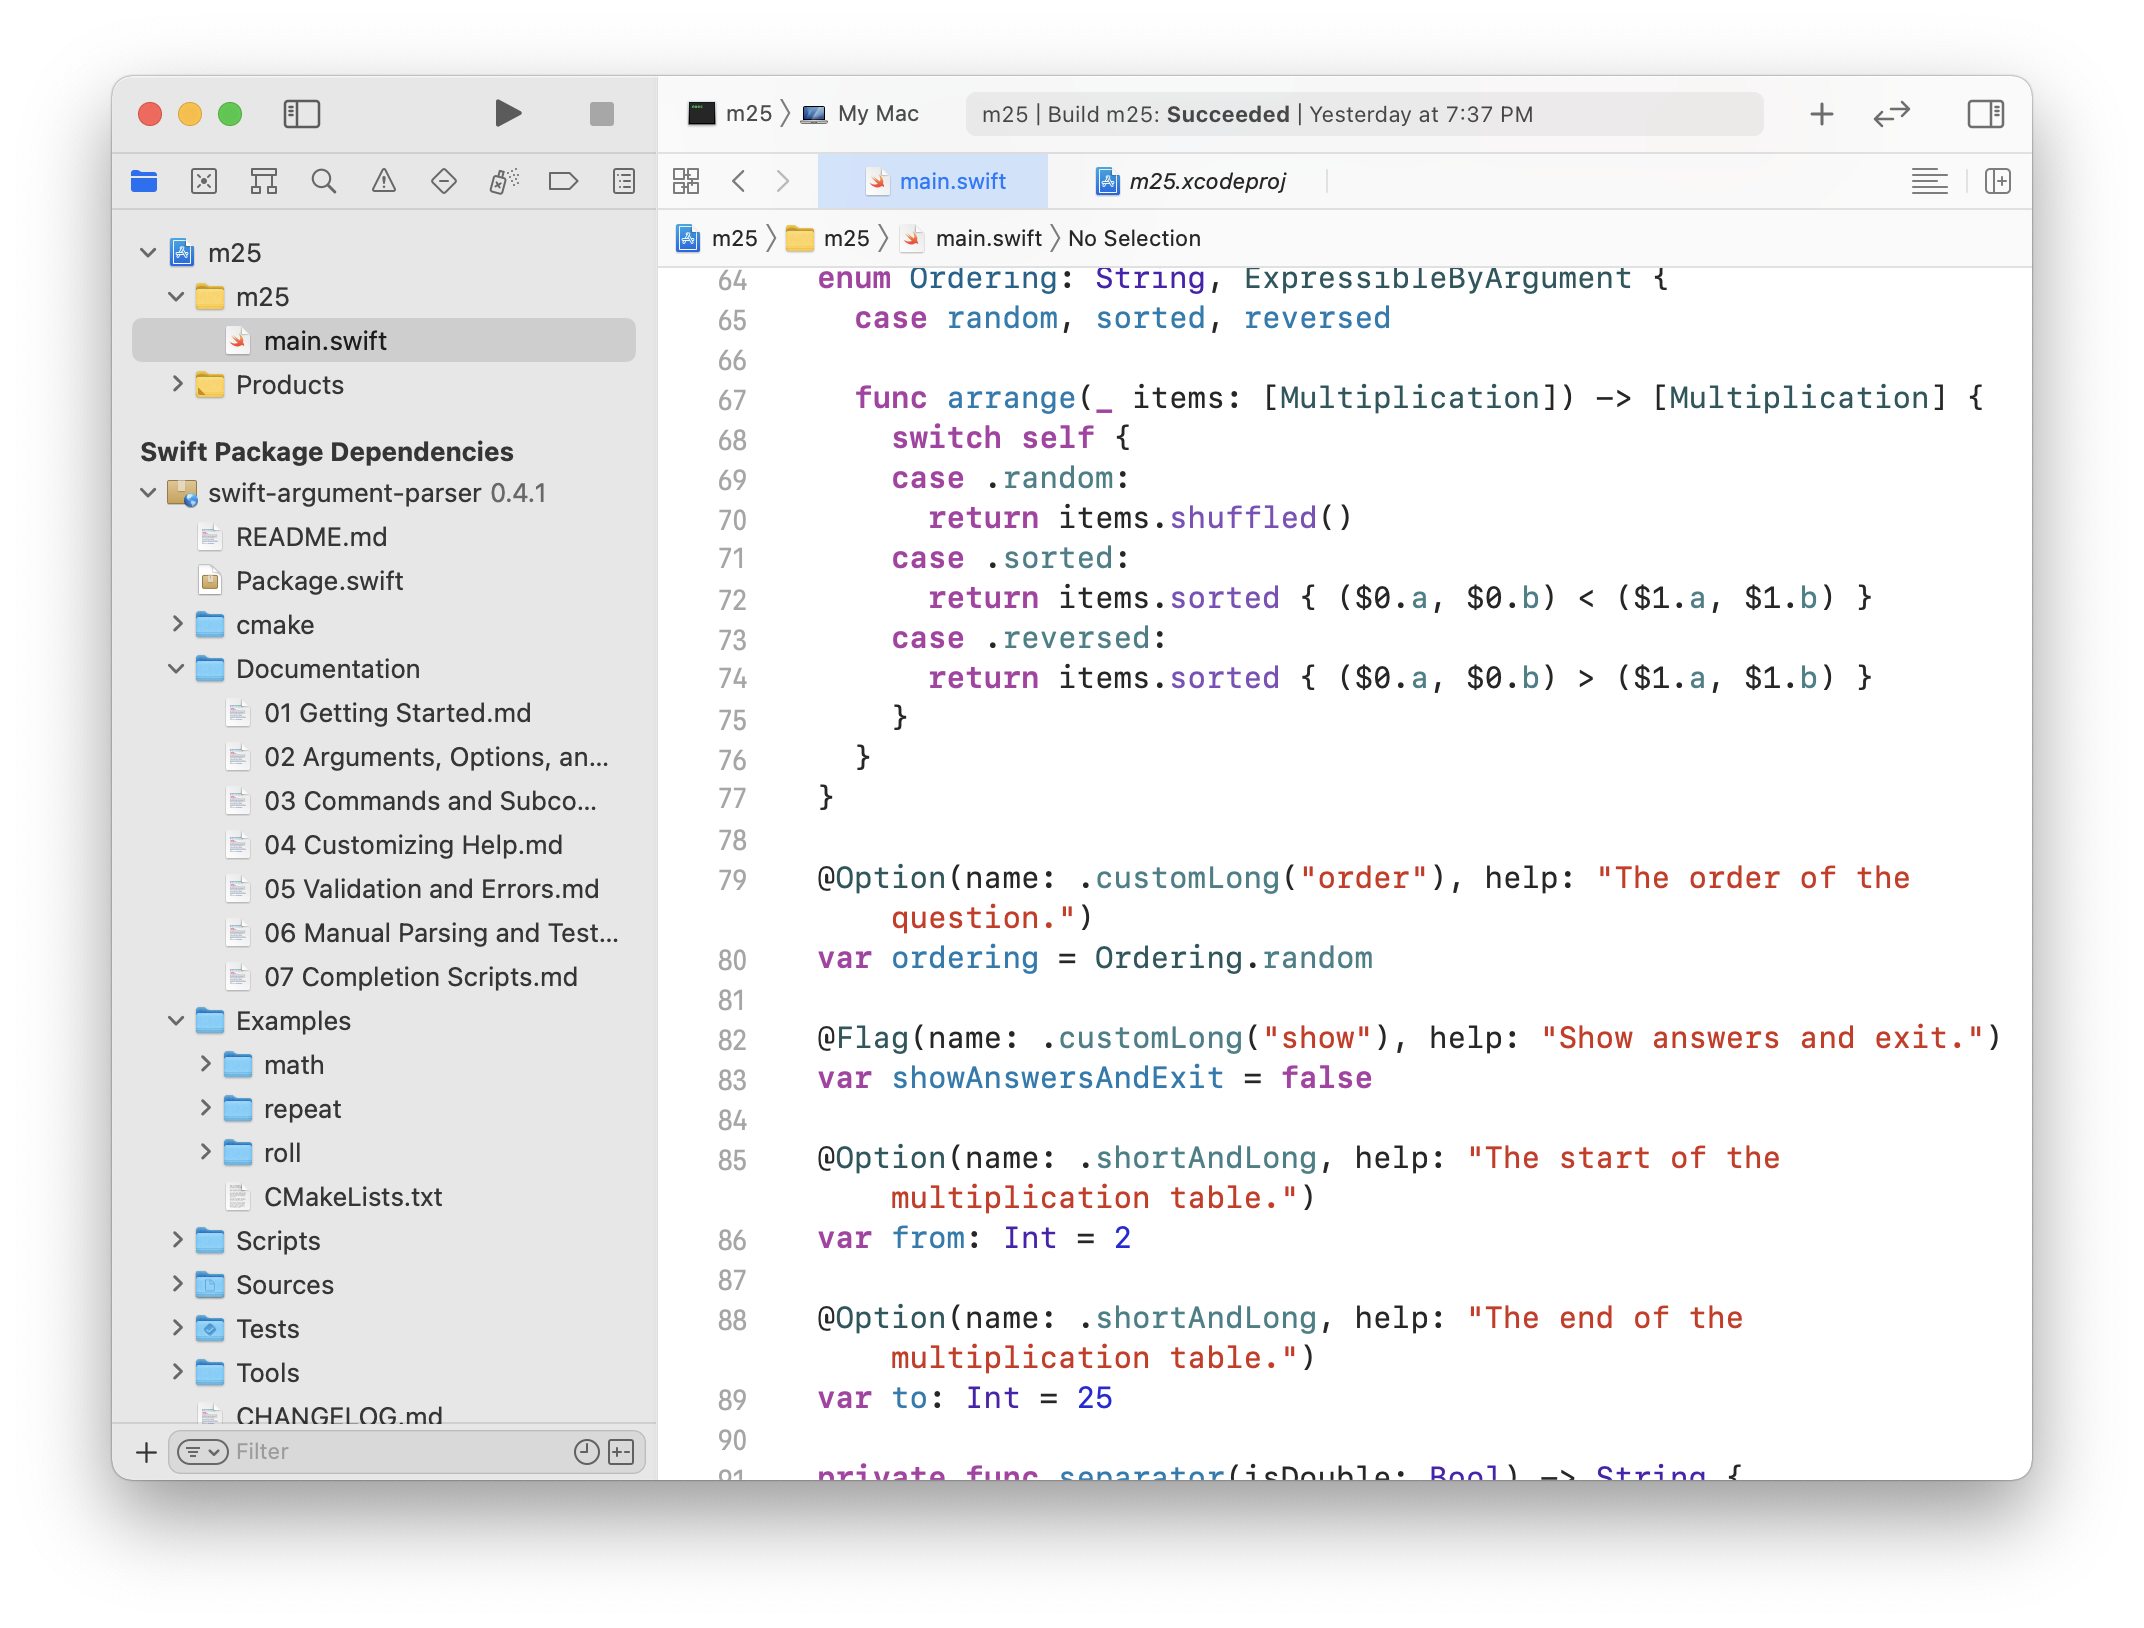 Documentation and Examples in Xcode